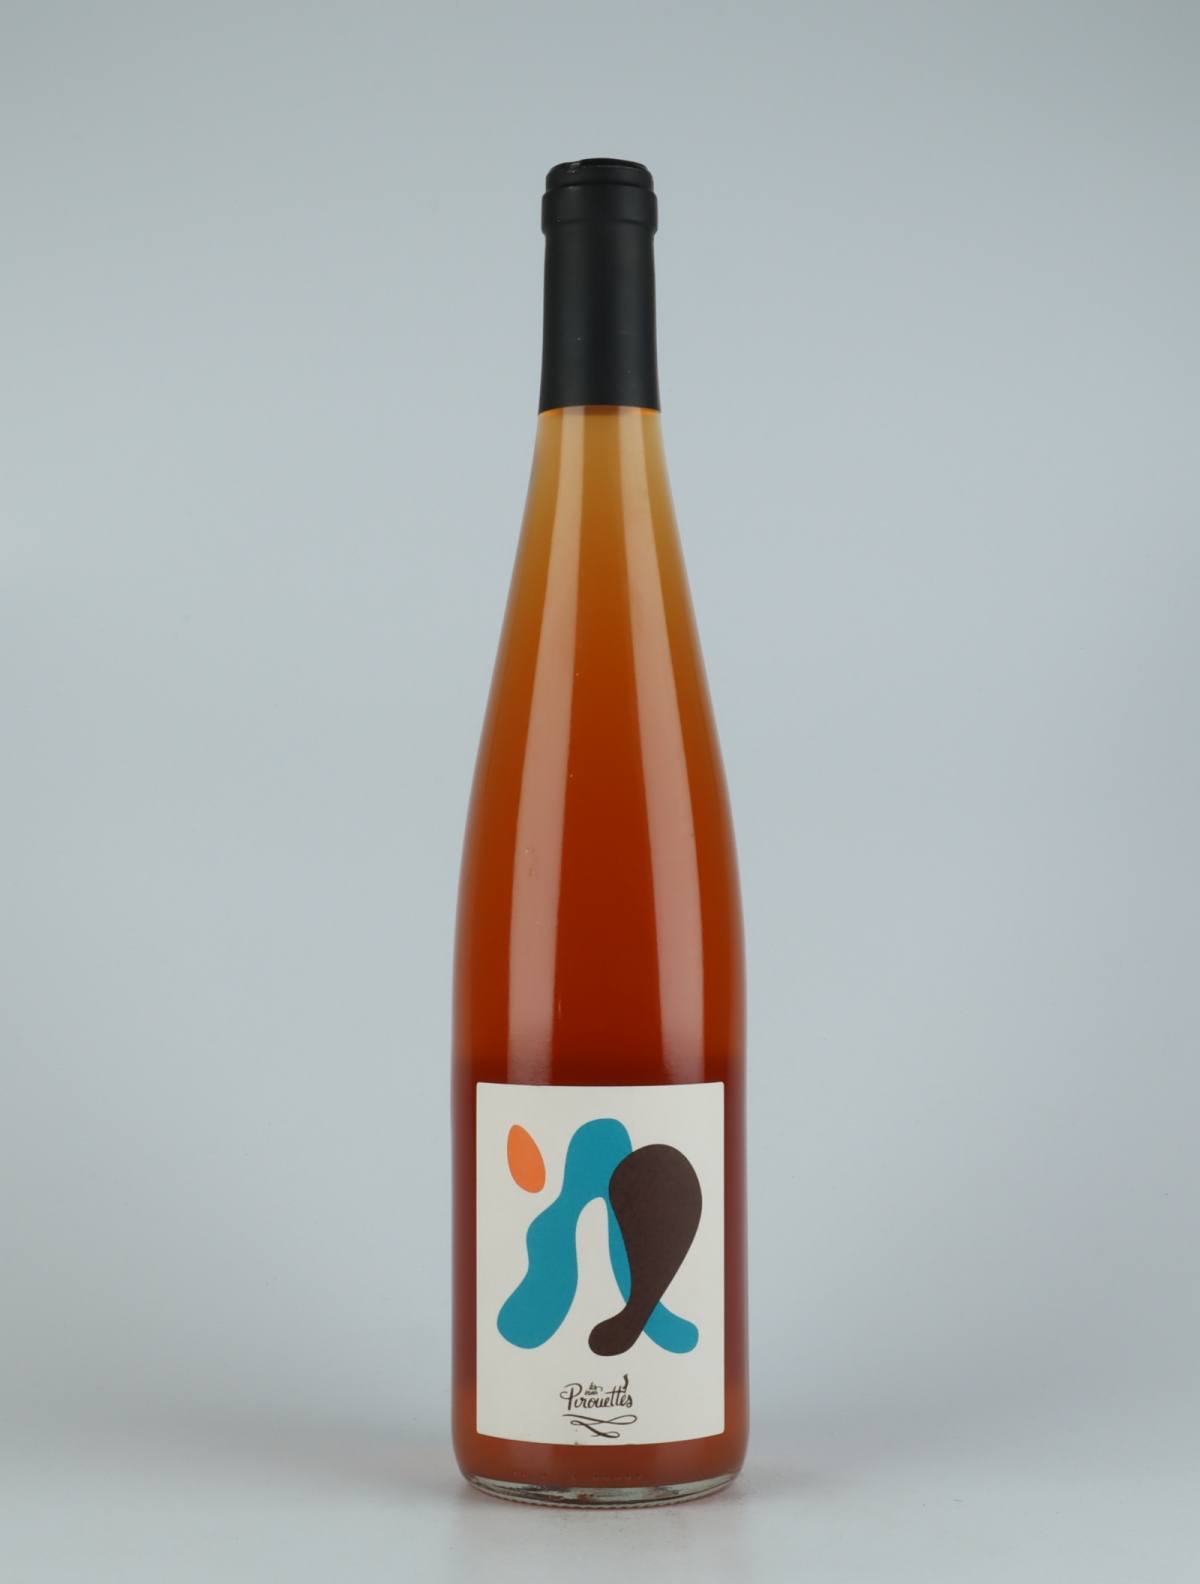 A bottle 2020 Eros Orange wine from Les Vins Pirouettes, Alsace in France